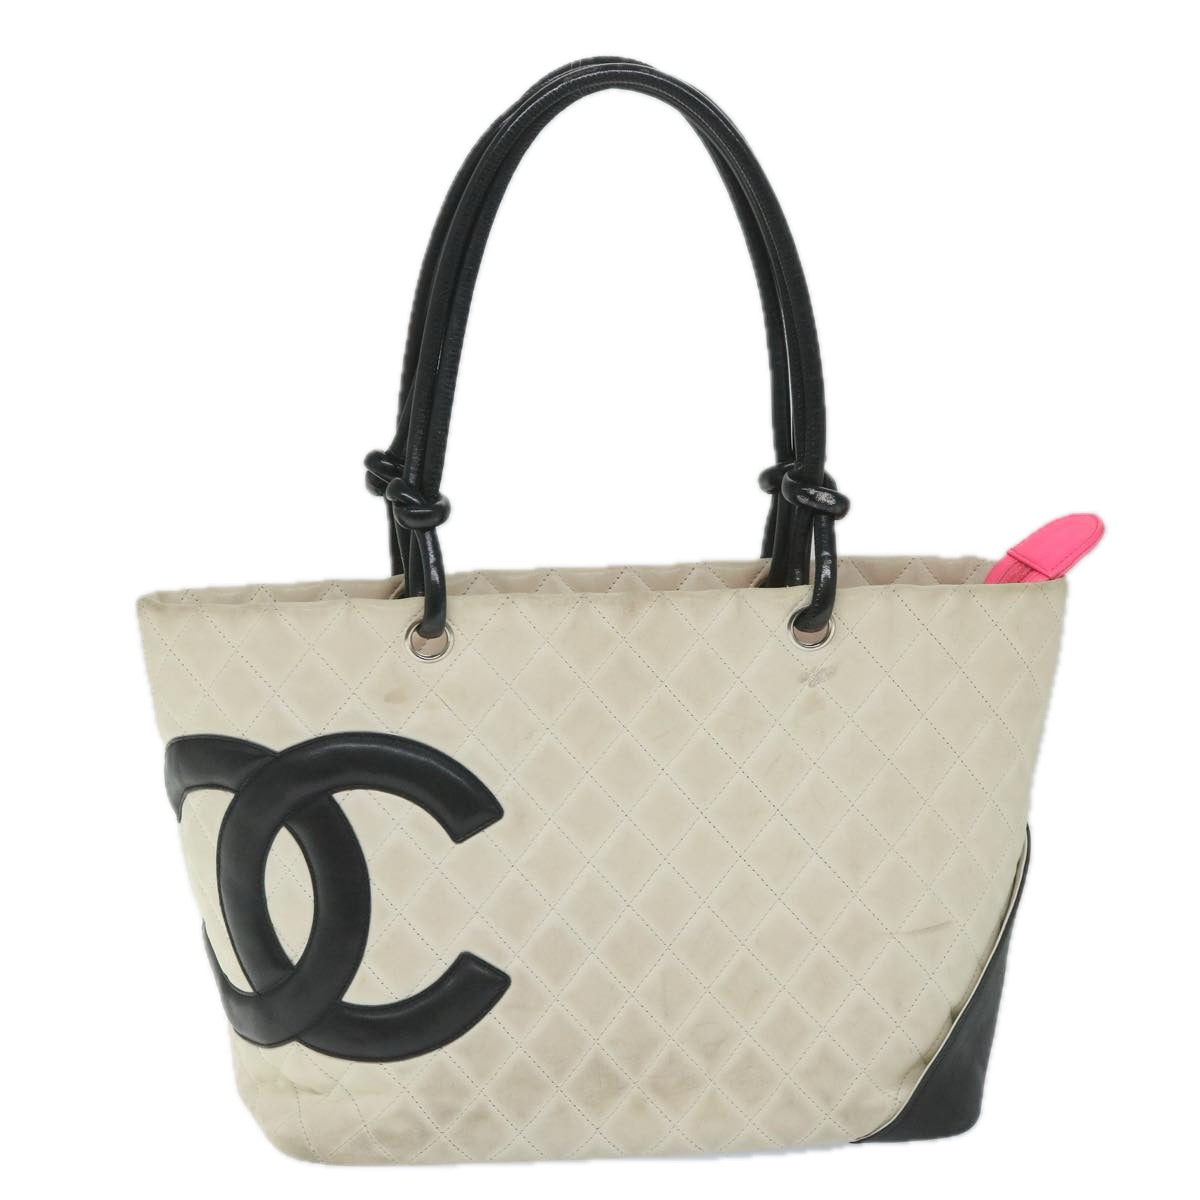 CHANEL Cambon Line Tote Bag Leather White CC Auth am5180